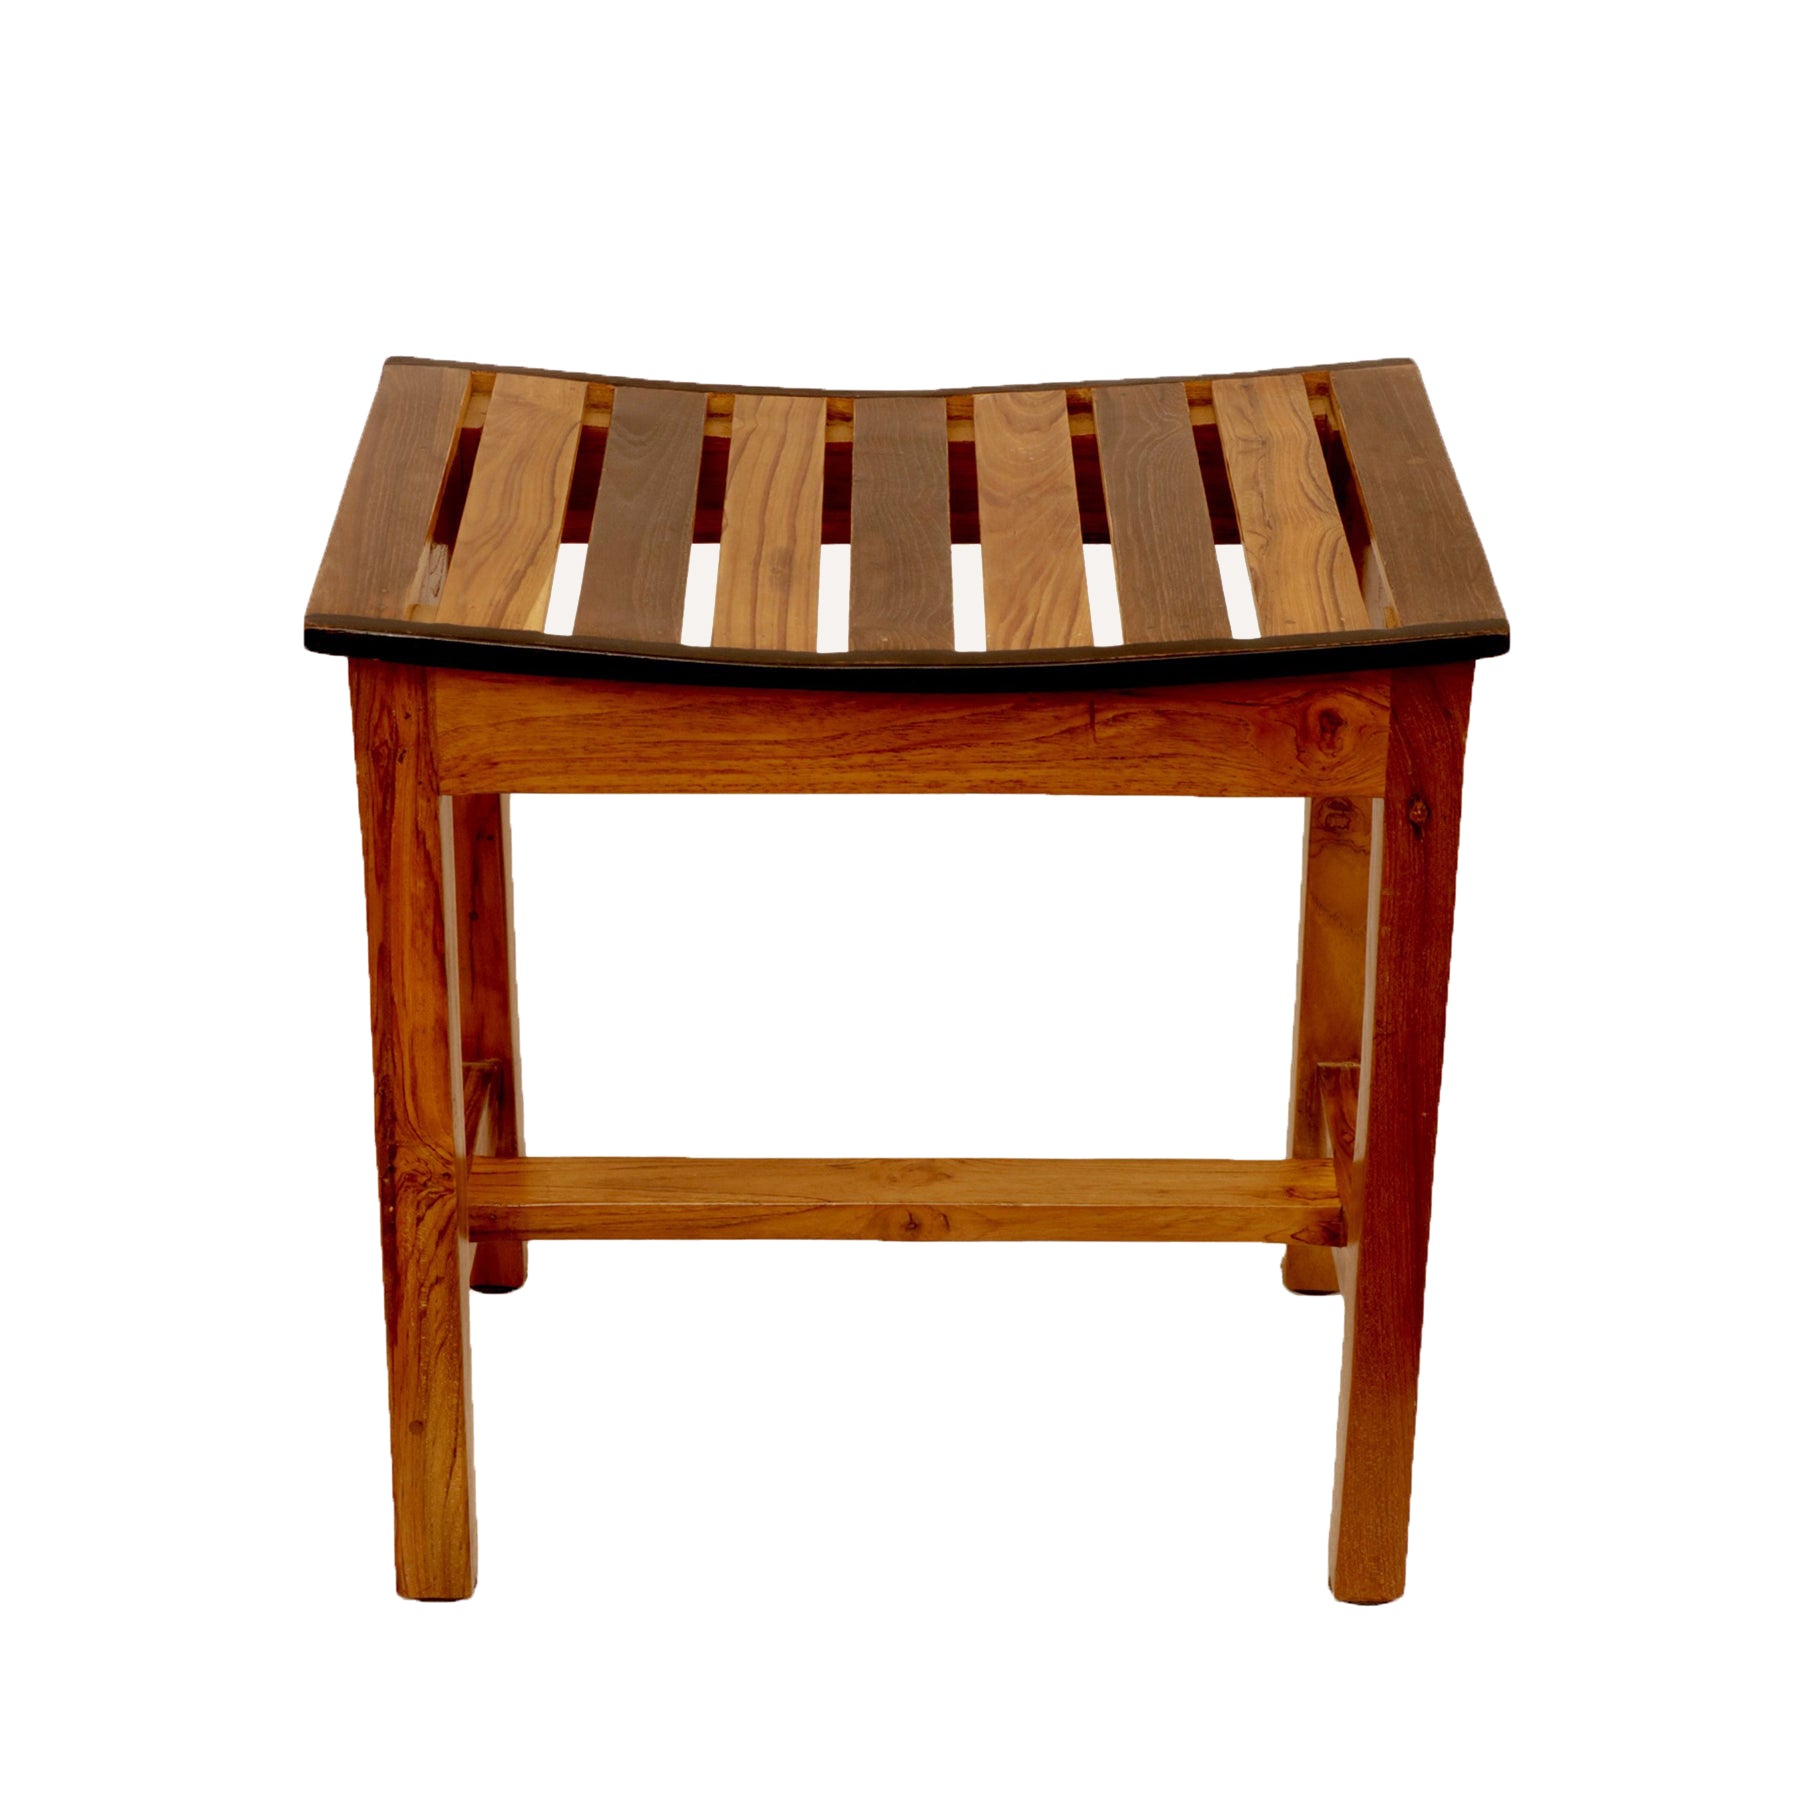 Curved Rectangle Solid Wood Stool Stool